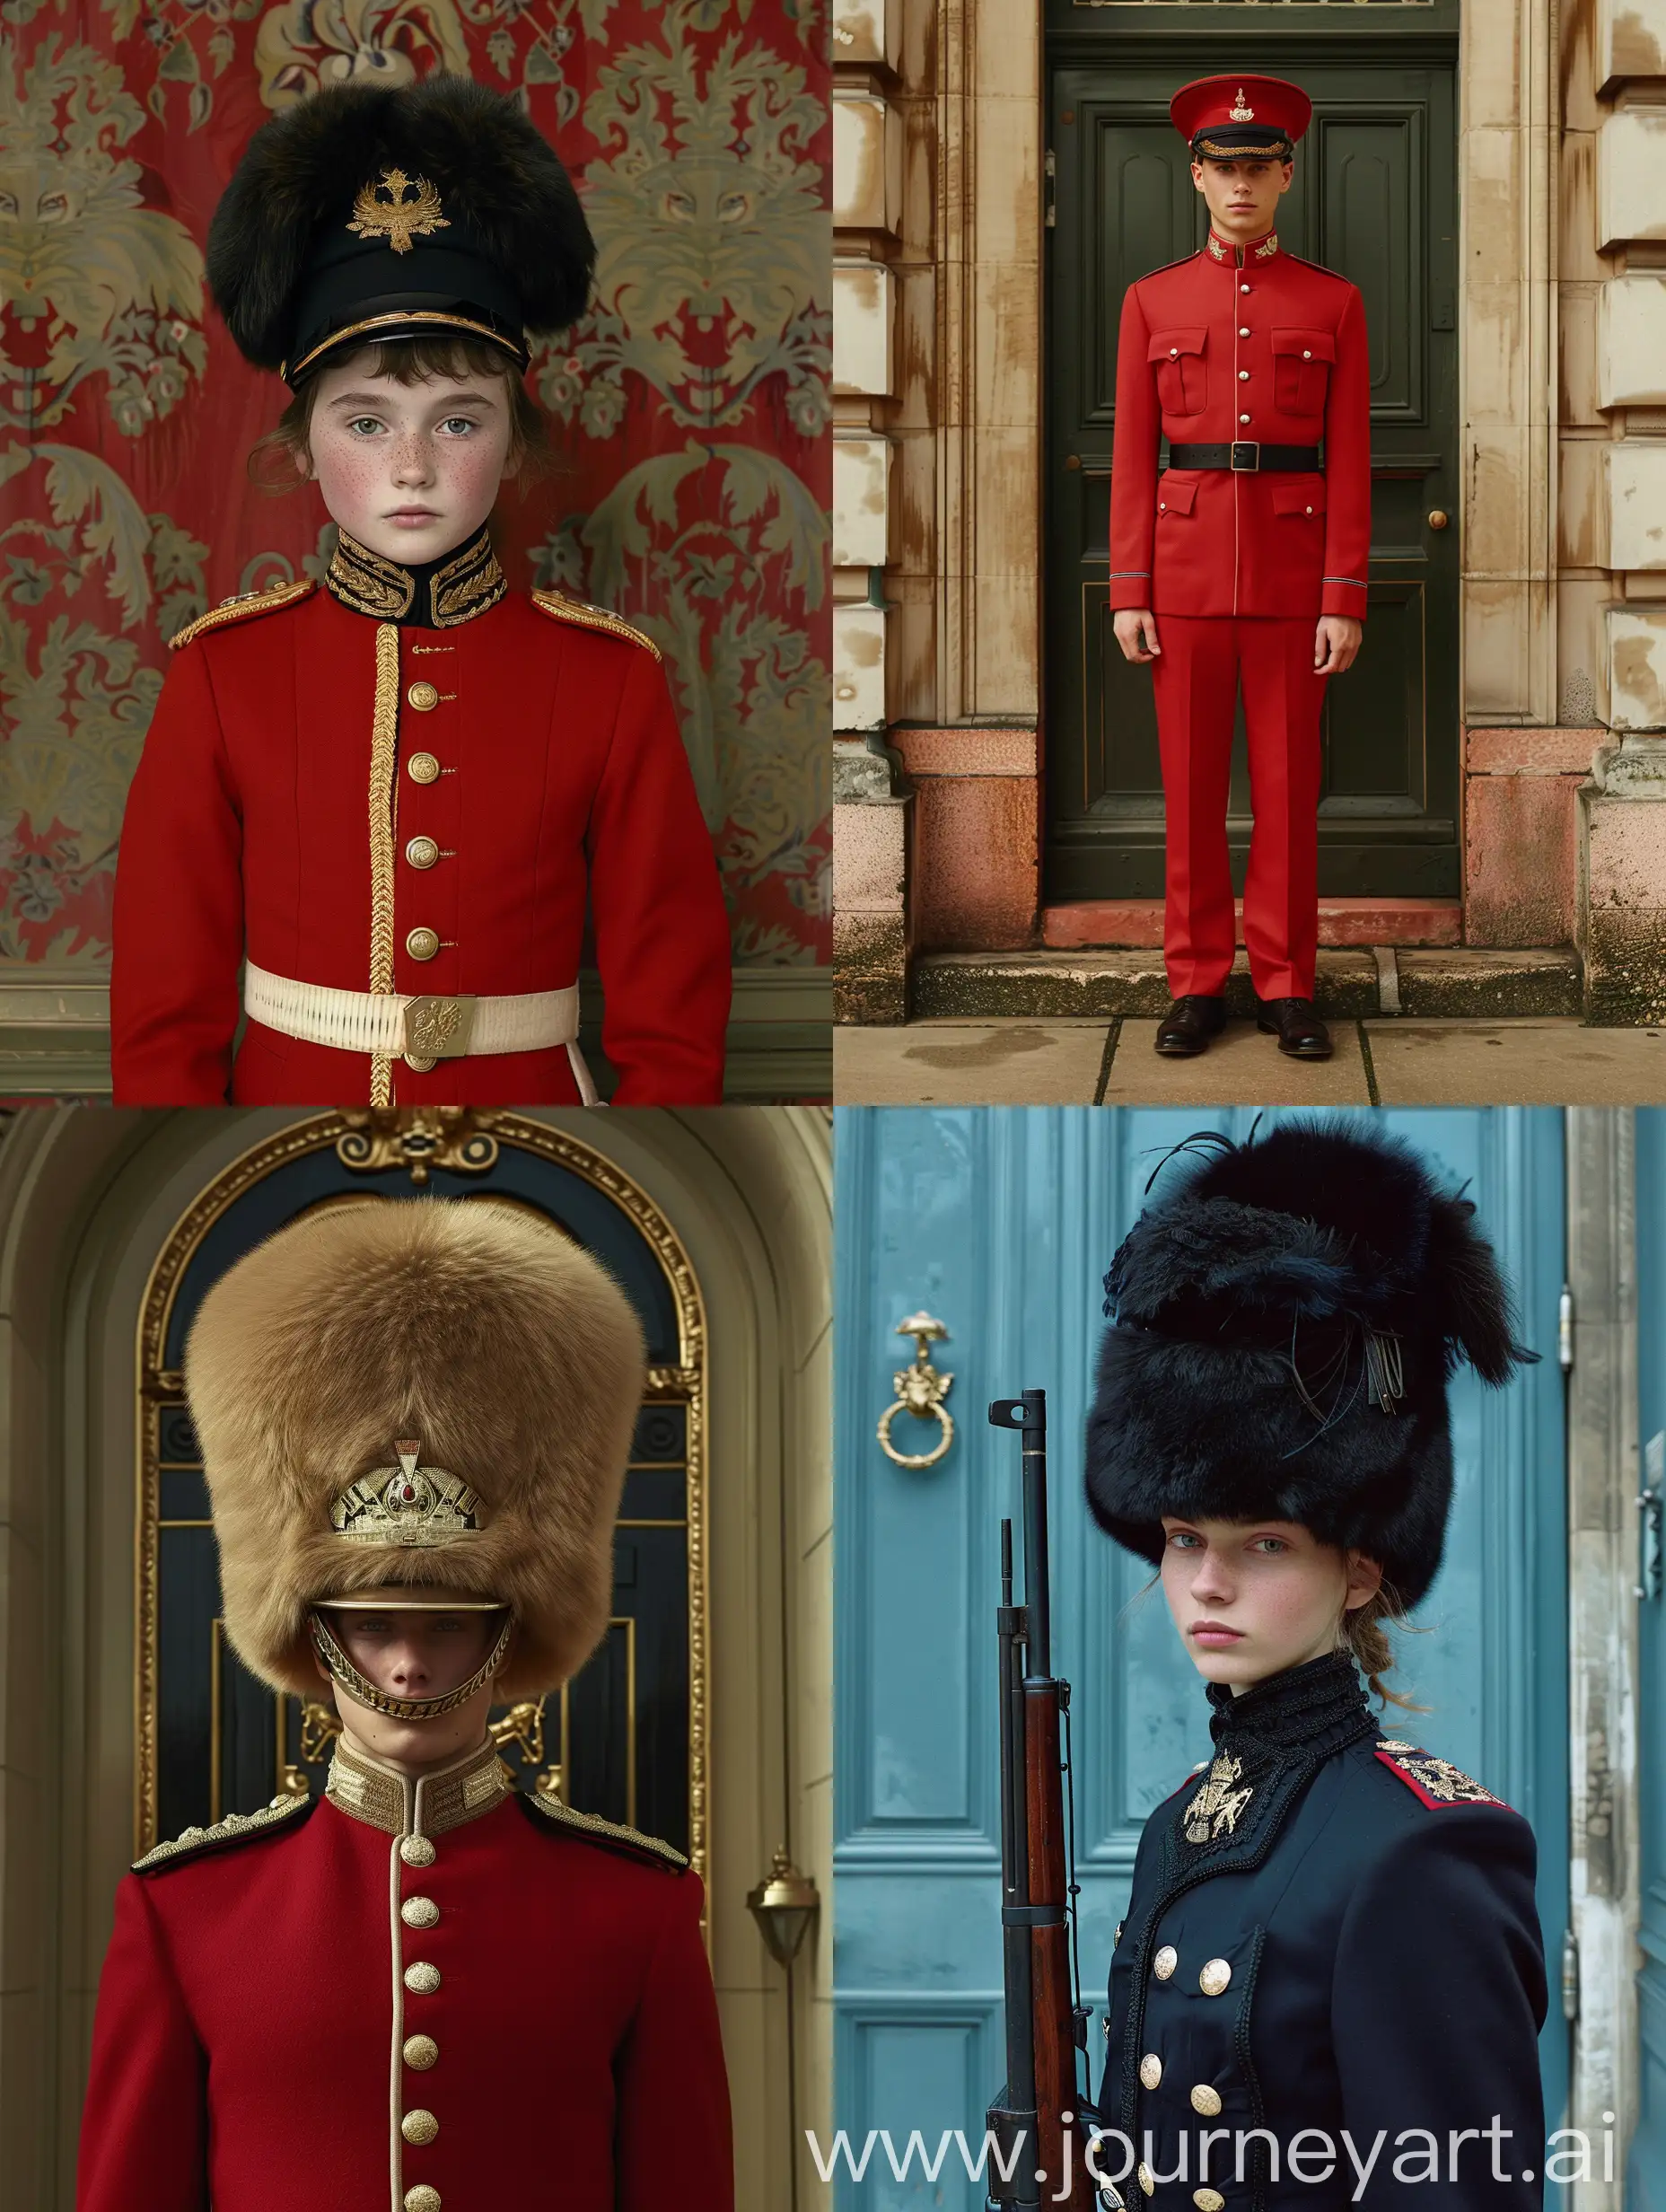 buckingum palace guard makeover cap will be same dress in wes anderson style